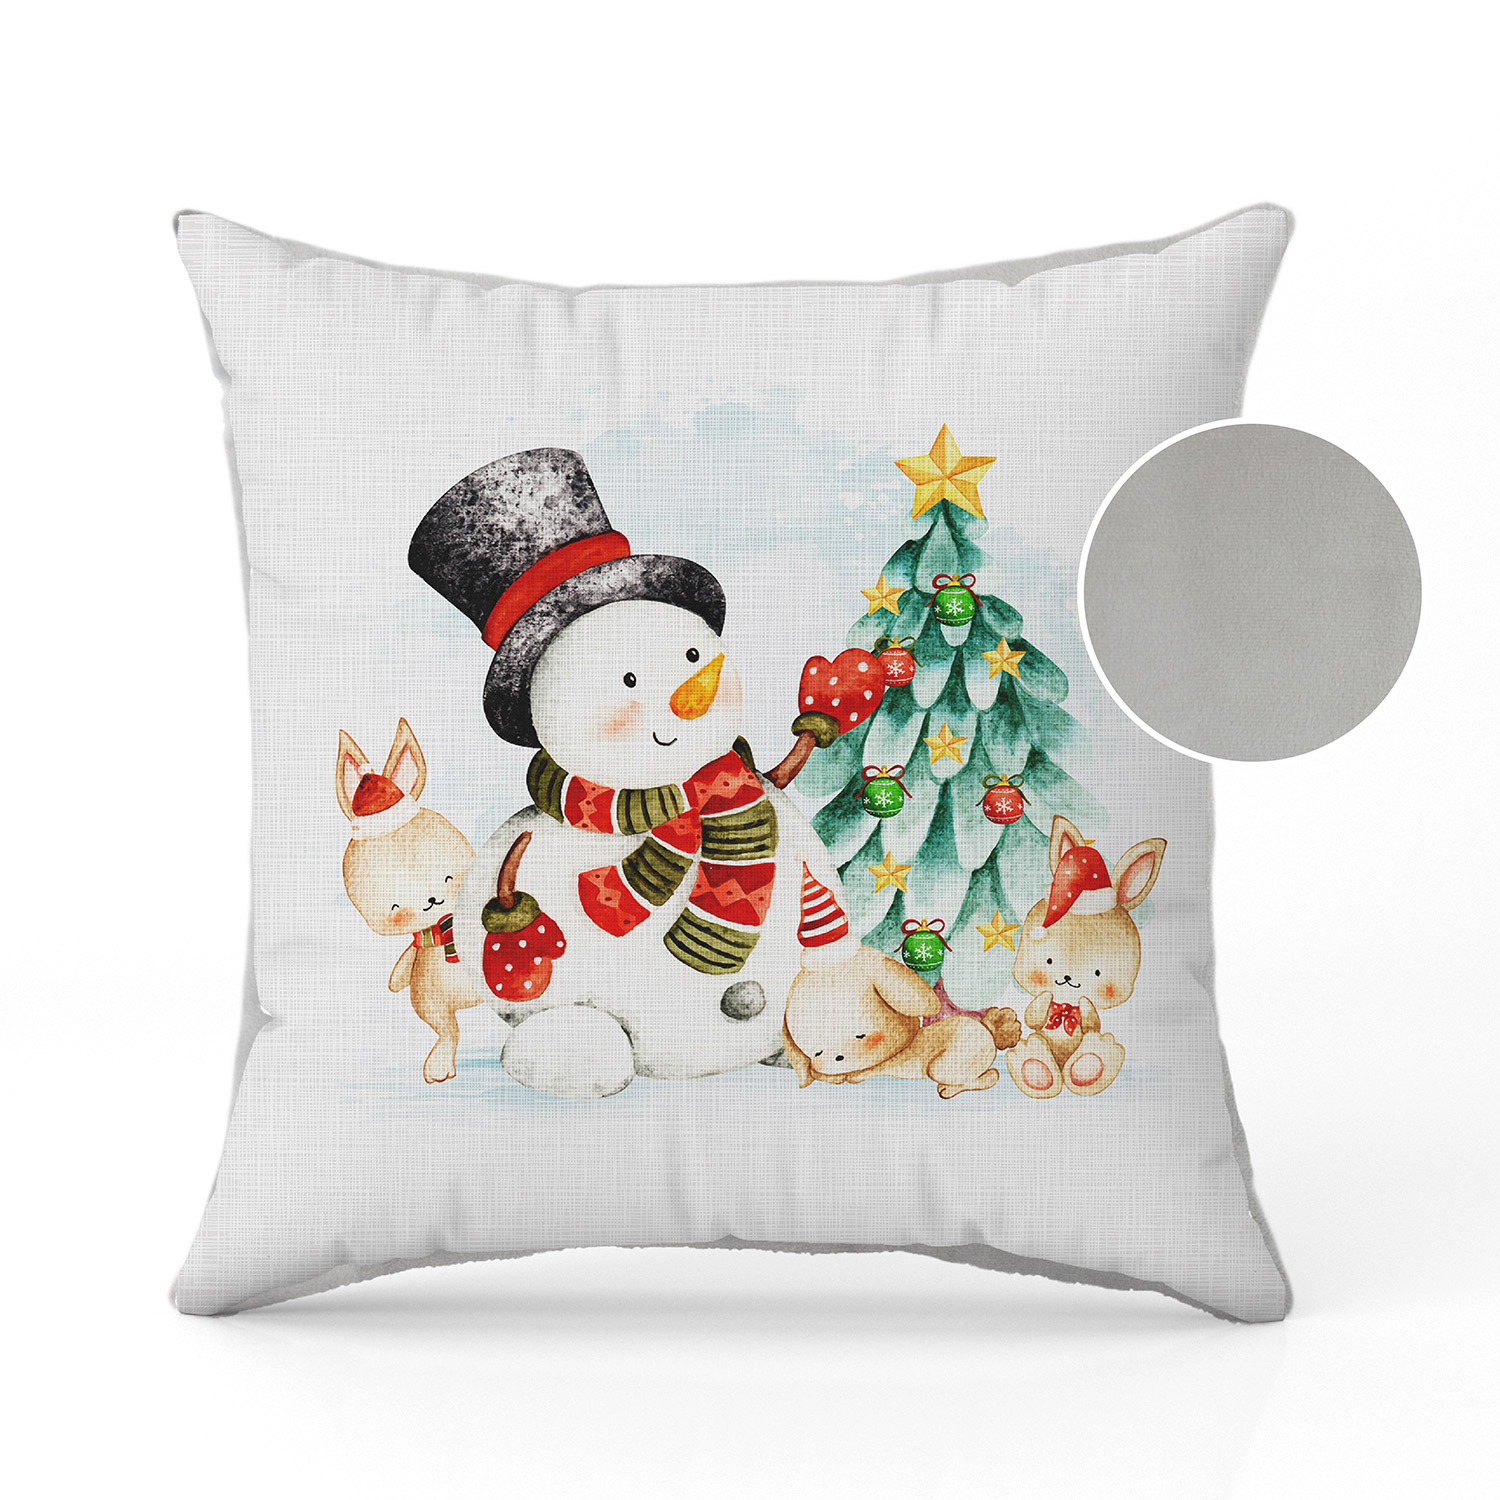 Christmas pillow with Snowman and tree